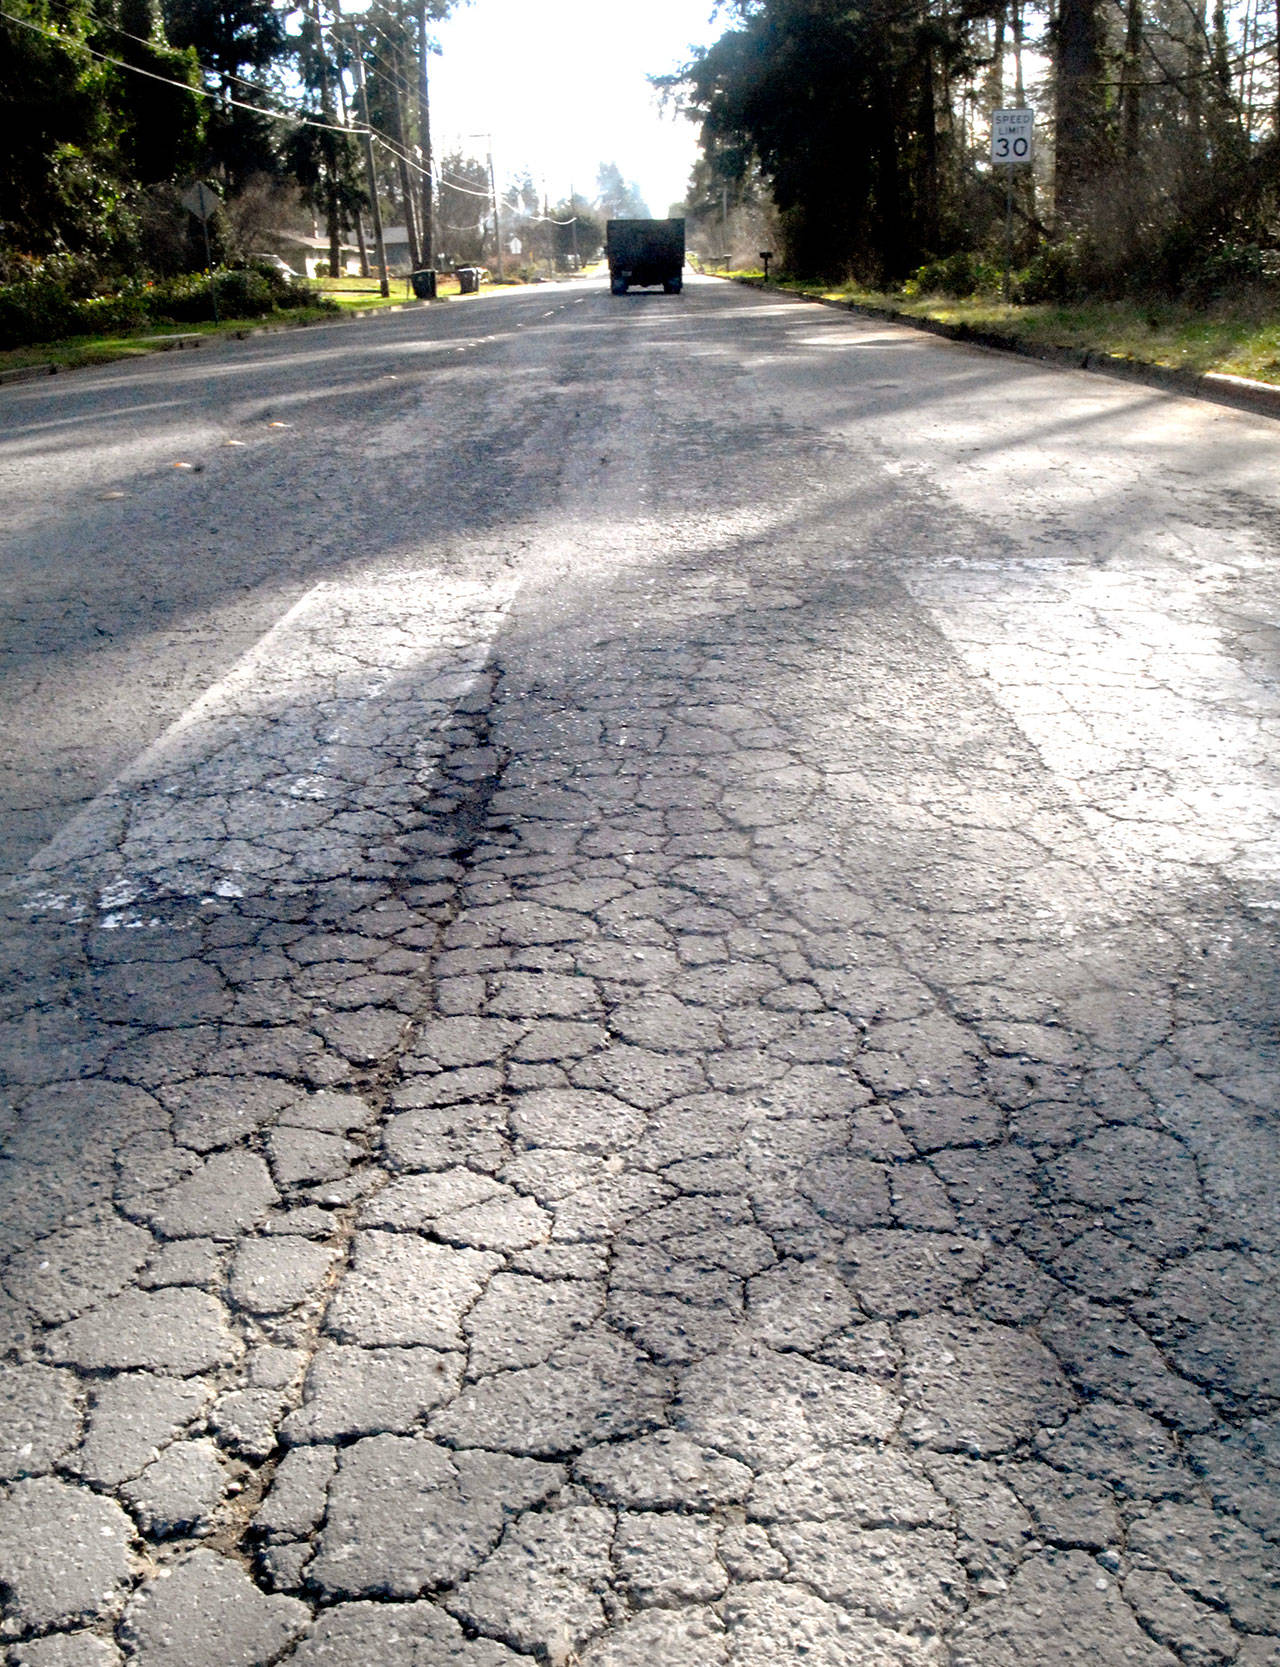 A cracked road surface greets motorists on West 10th Street in Port Angeles. The street is being considered for resurfacing by the city. (Keith Thorpe/Peninsula Daily News)